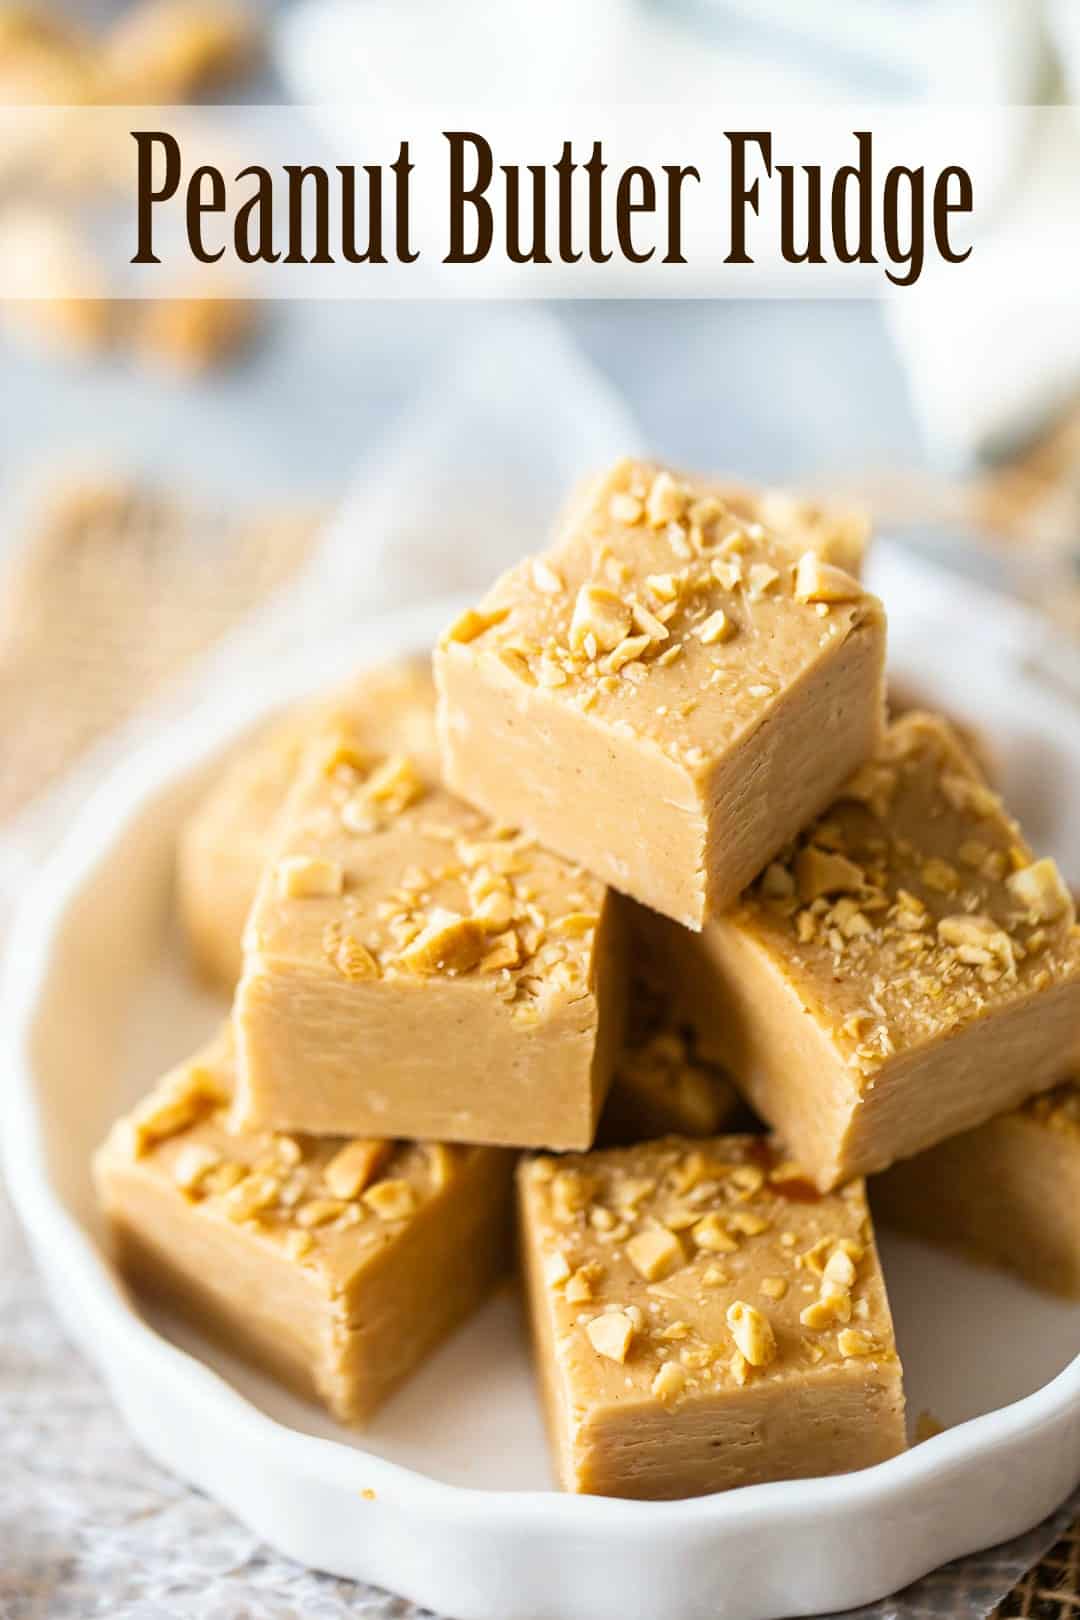 Easy peanut butter fudge cut into squares and presented in a white dish, with a text overlay above reading "Peanut Butter Fudge."